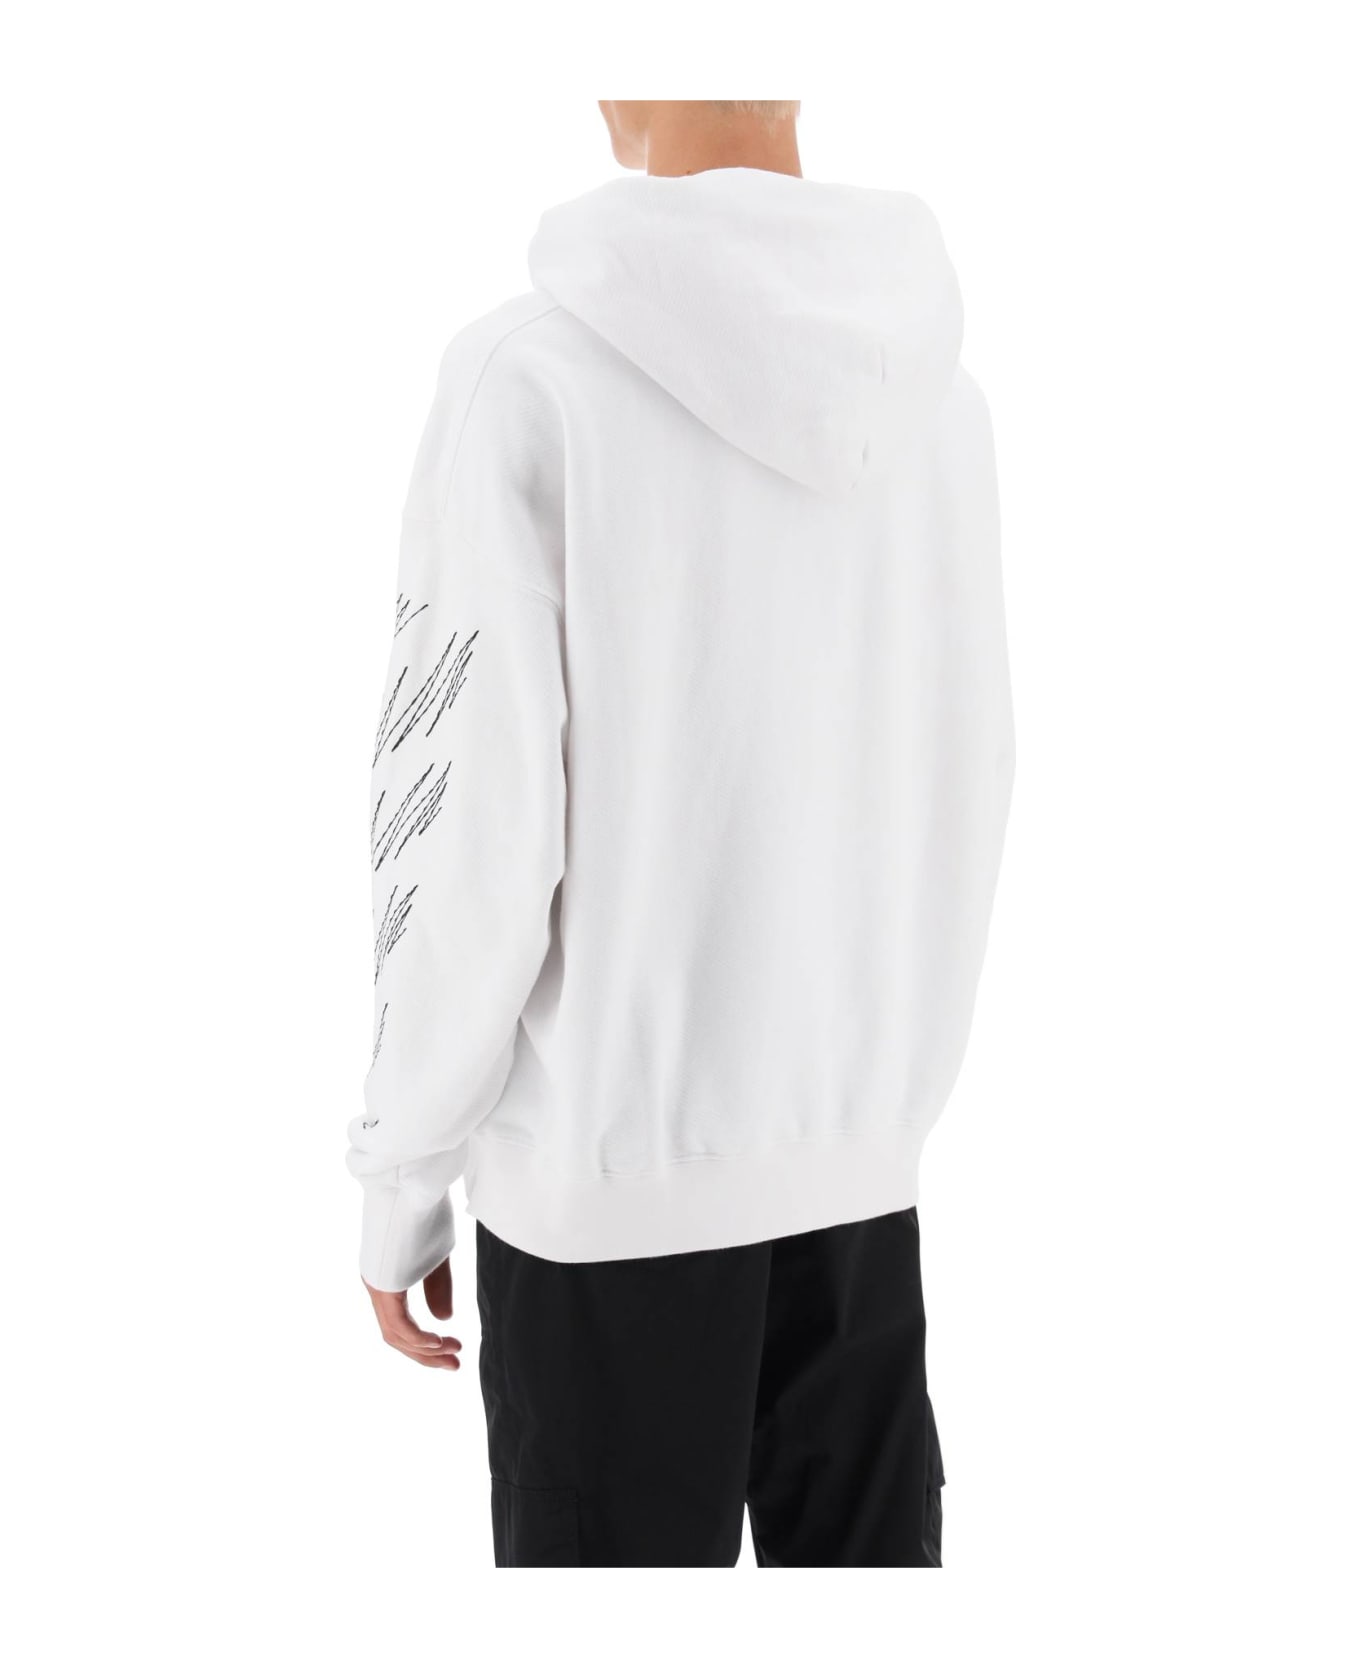 Off-White Hoodie With Contrasting Topstitching - WHITE BLACK (White)